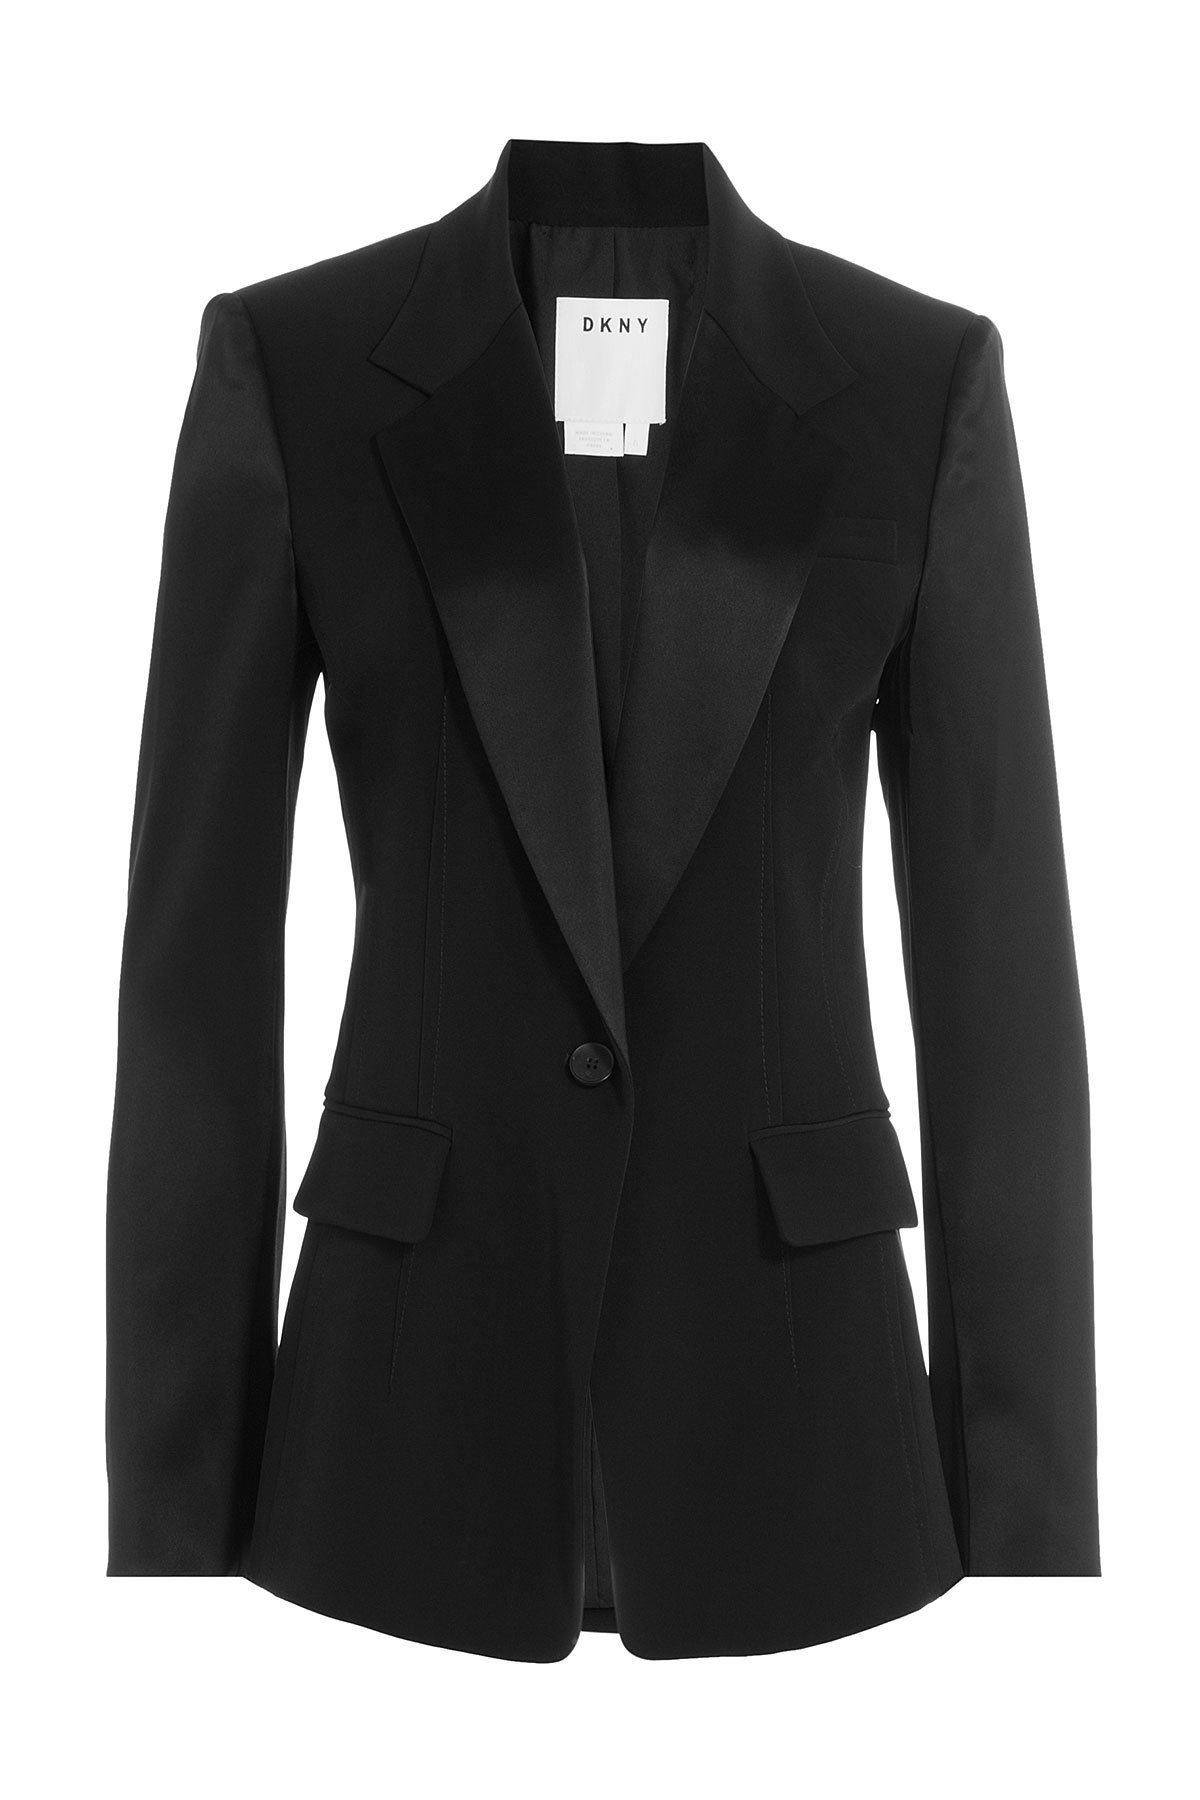 20 Not-Your-Average Black Blazers That Feel Anything But Meh | Oye! Times